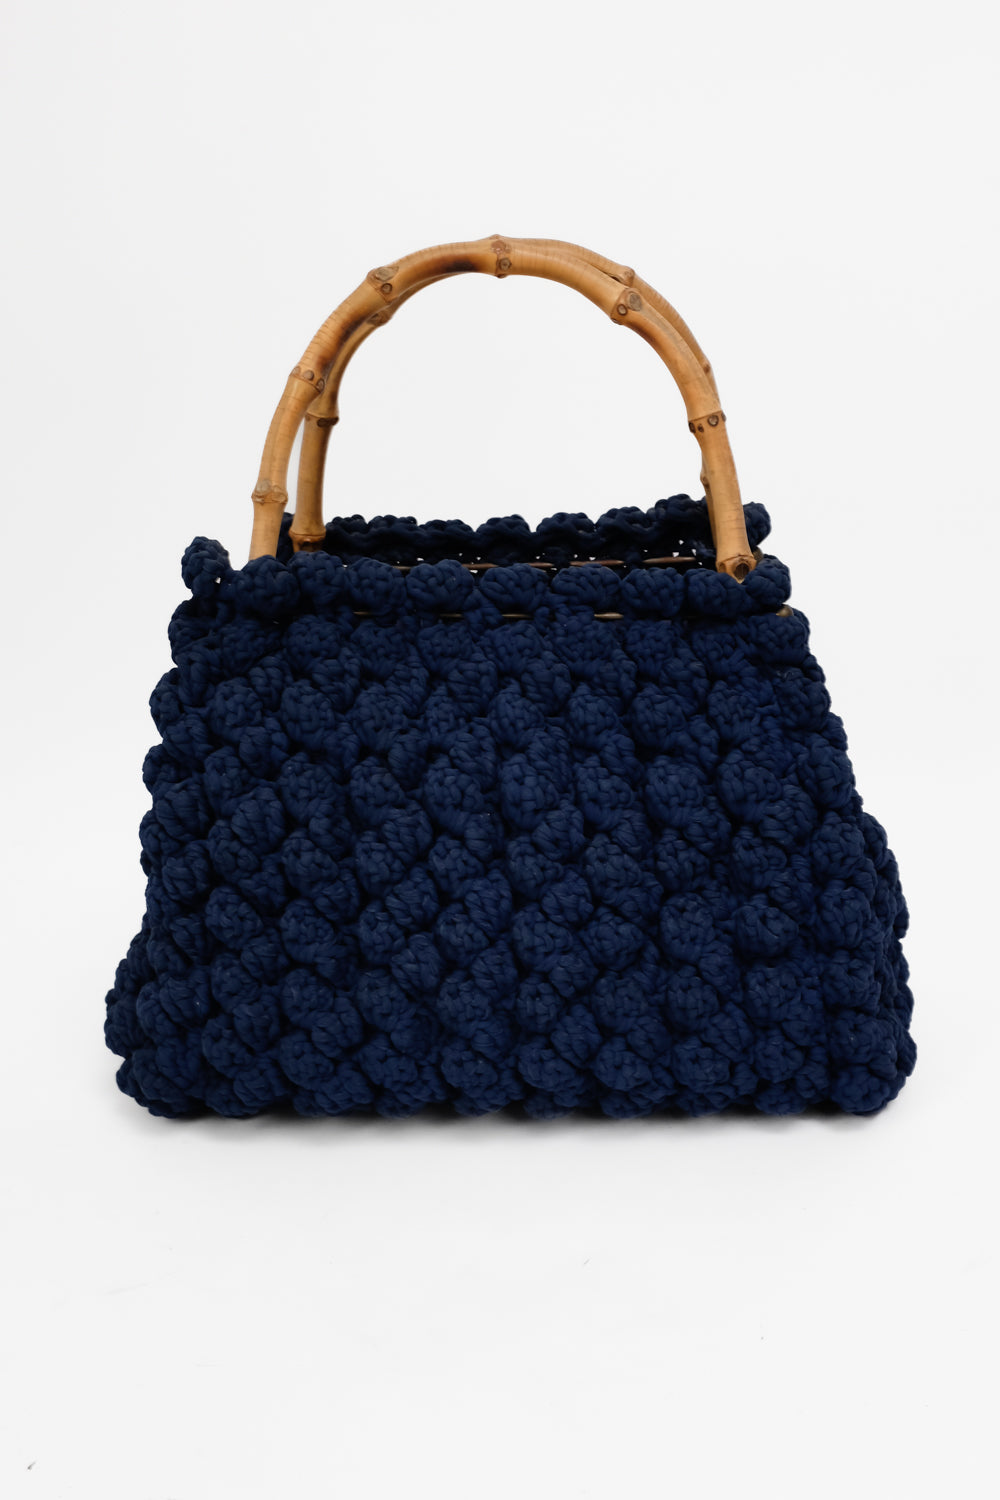 QUILTED KNIT BAMBOO HANDLE VINTAGE BAG